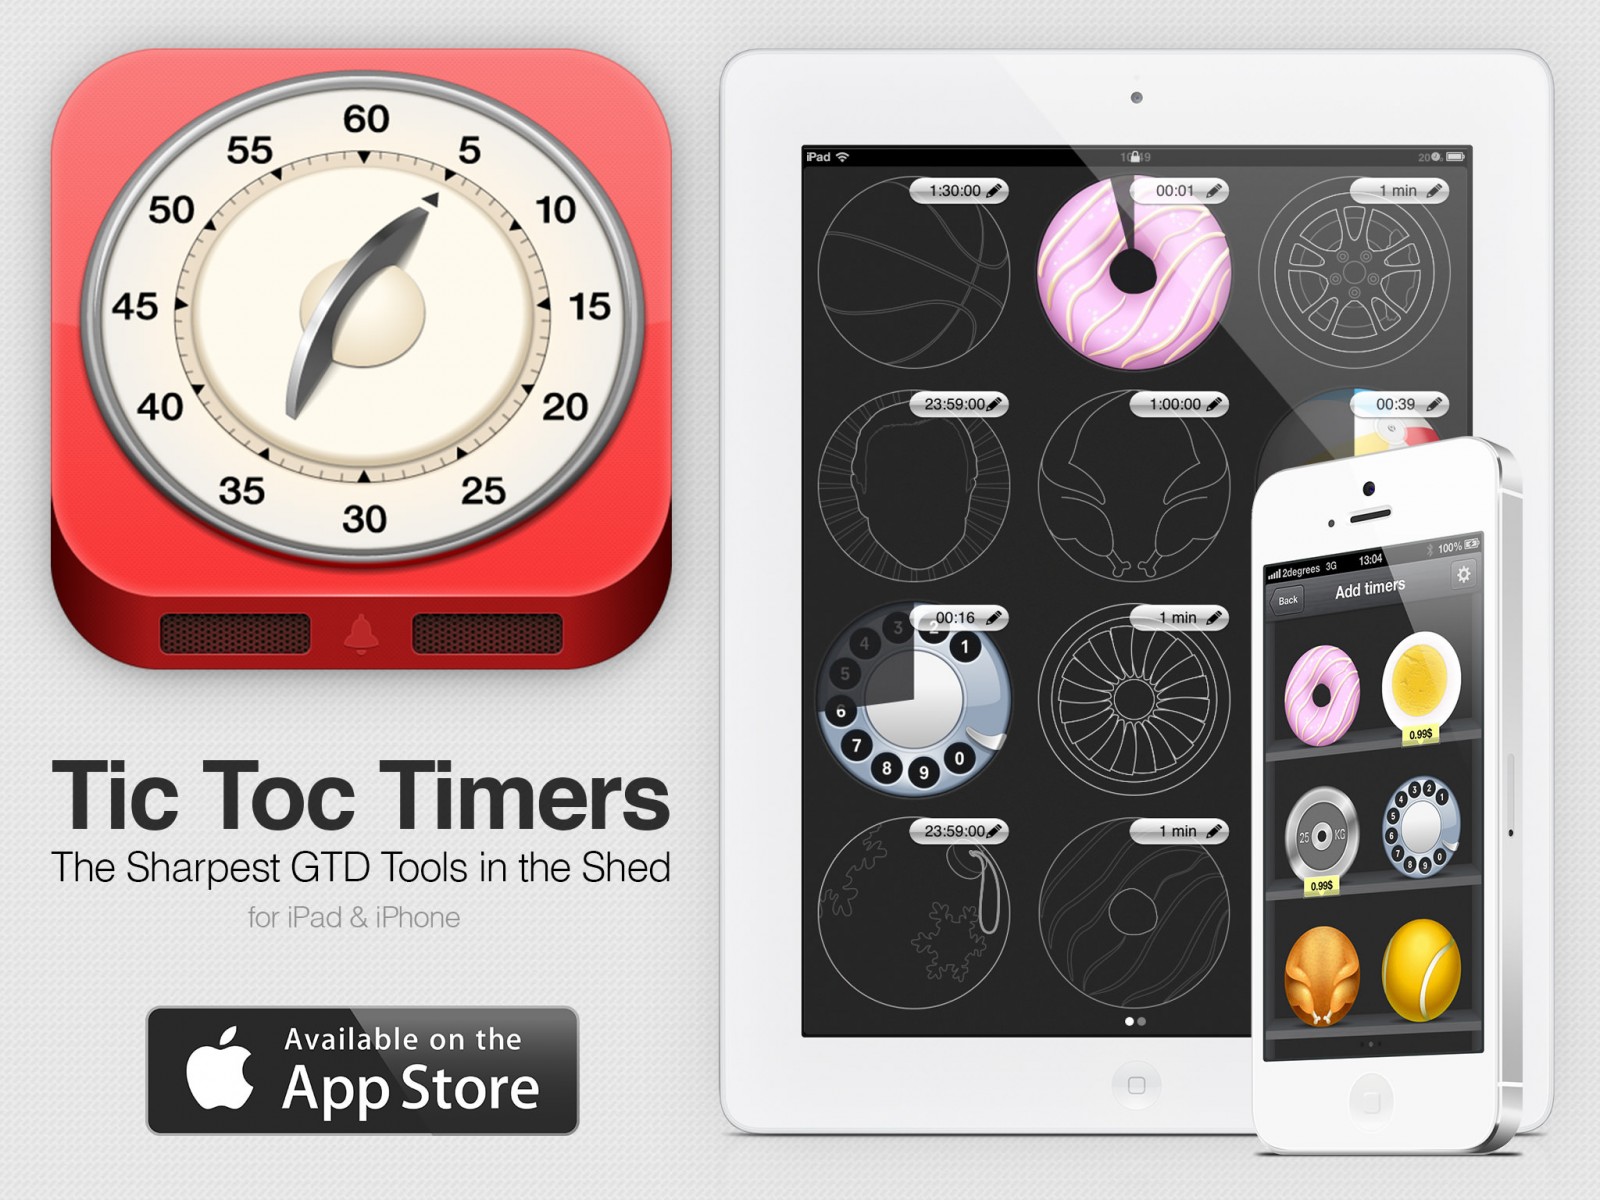 tic-toc-timers-hd